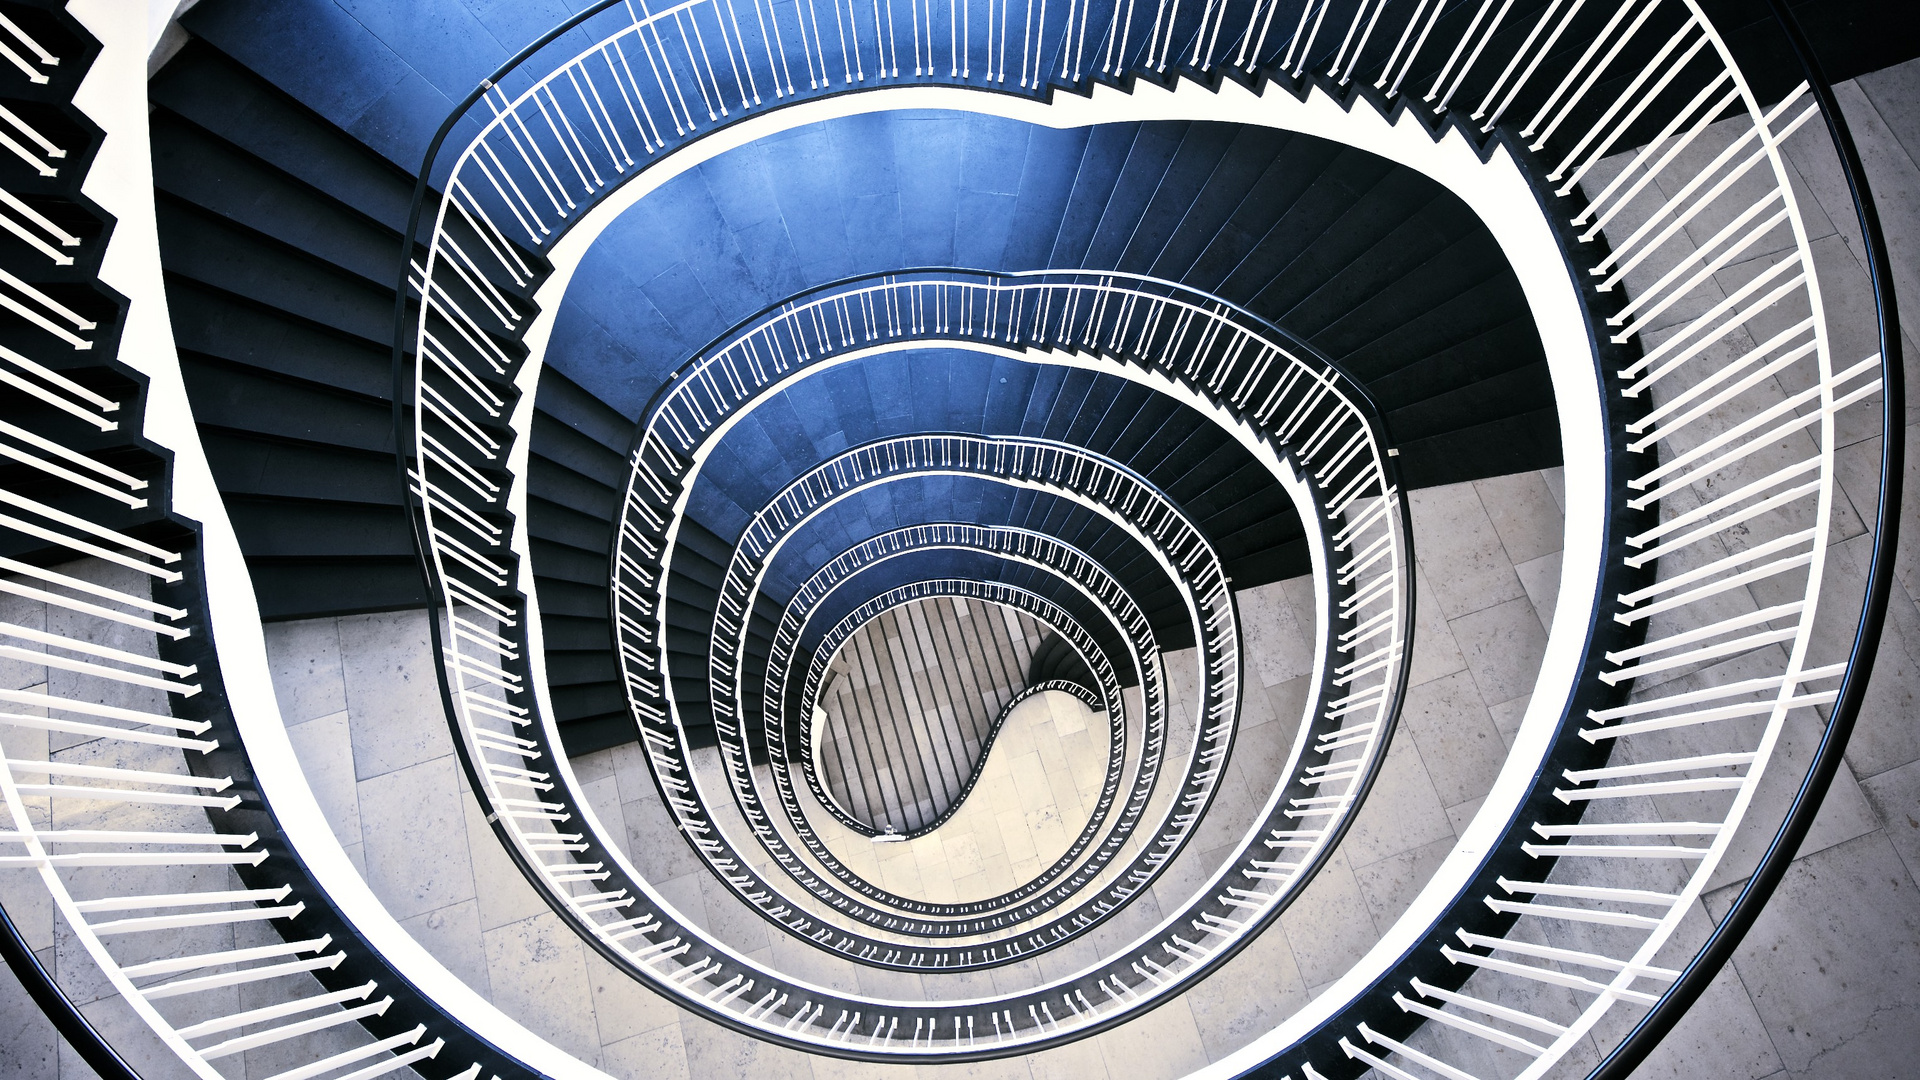 From the Series: Staircase Abstractions [20]